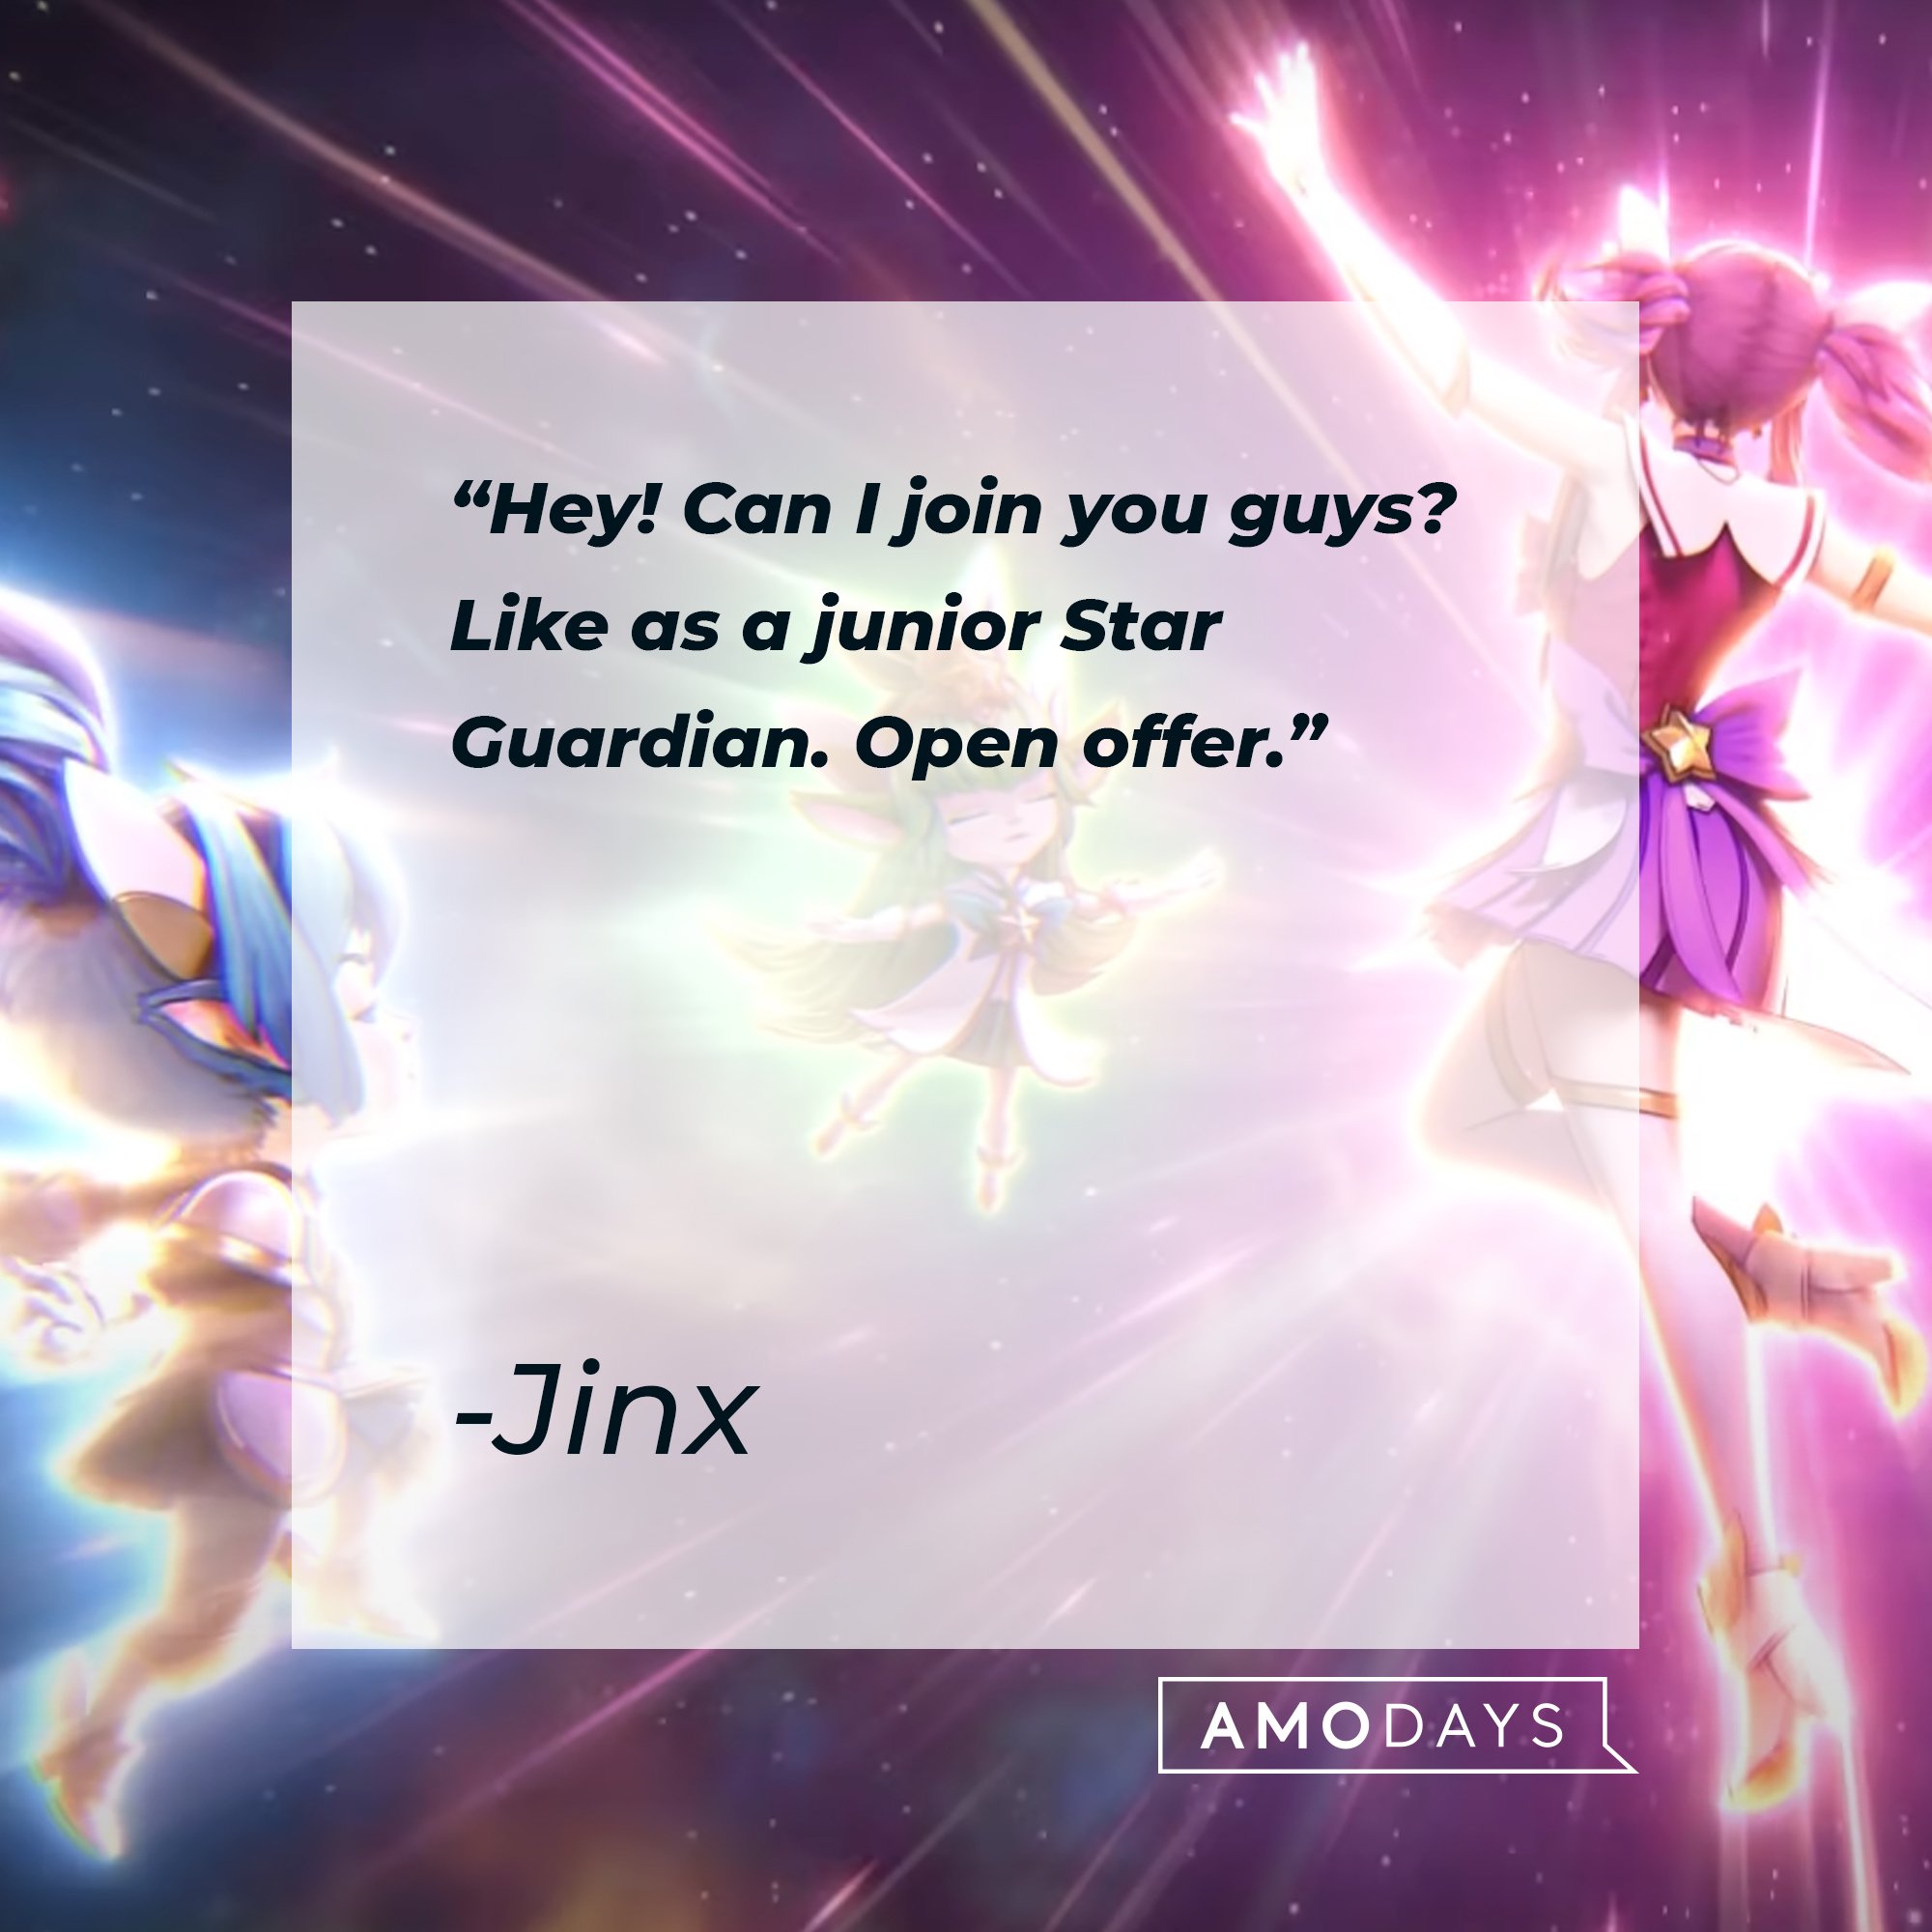 Jinx's quote: "Hey! Can I join you guys? Like as a junior Star Guardian. Open offer."  | Image: AmoDays